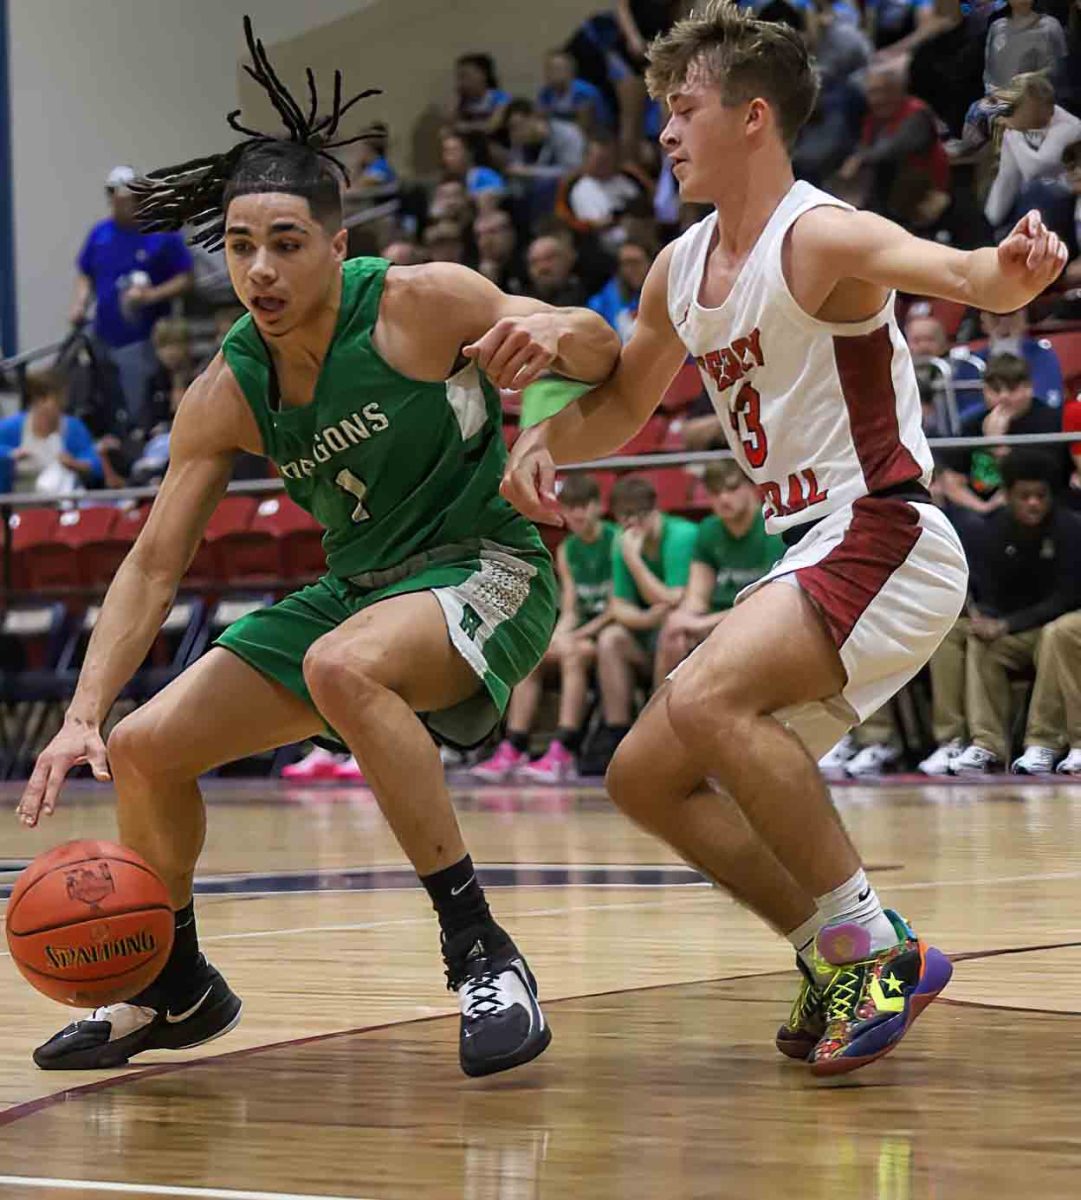 Harlan guard Kyler McLendon, pictured in action earlier this season, scored 44 points on Wednesday as the Green Dragons downed Wayne County in double overtime.